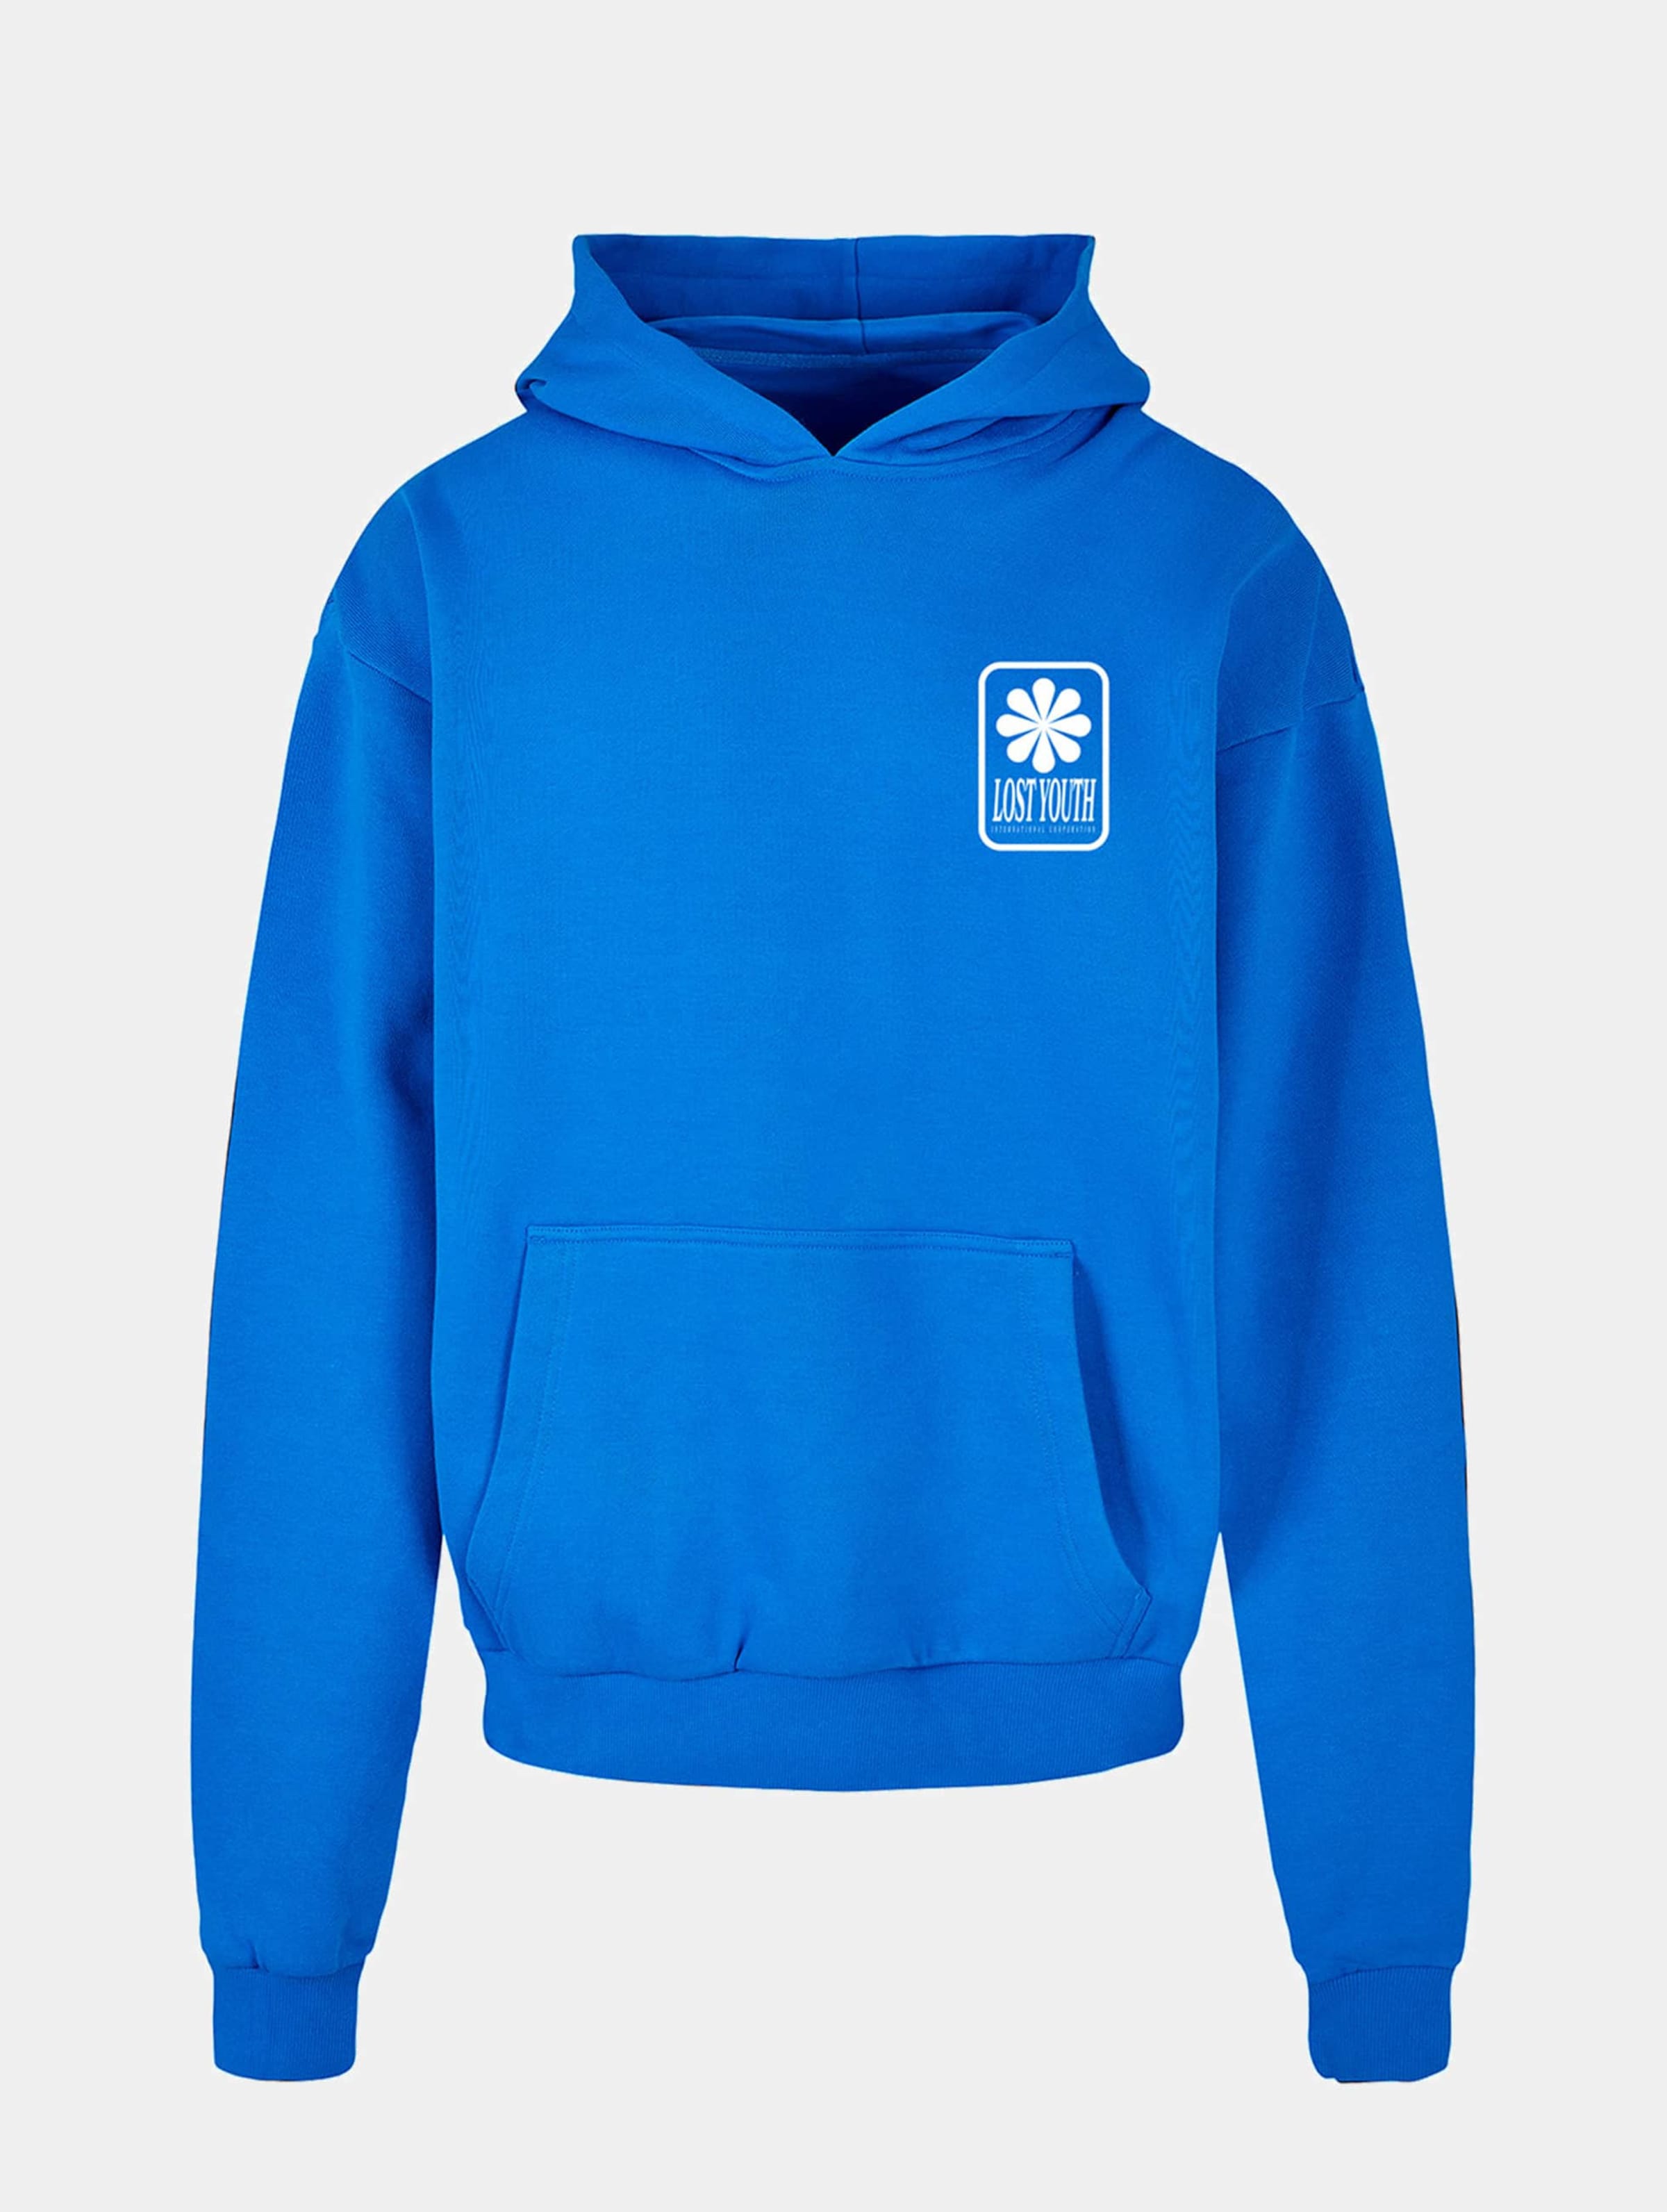 Lost Youth LY HOODY - ICON V.4 Mannen op kleur blauw, Maat 5XL